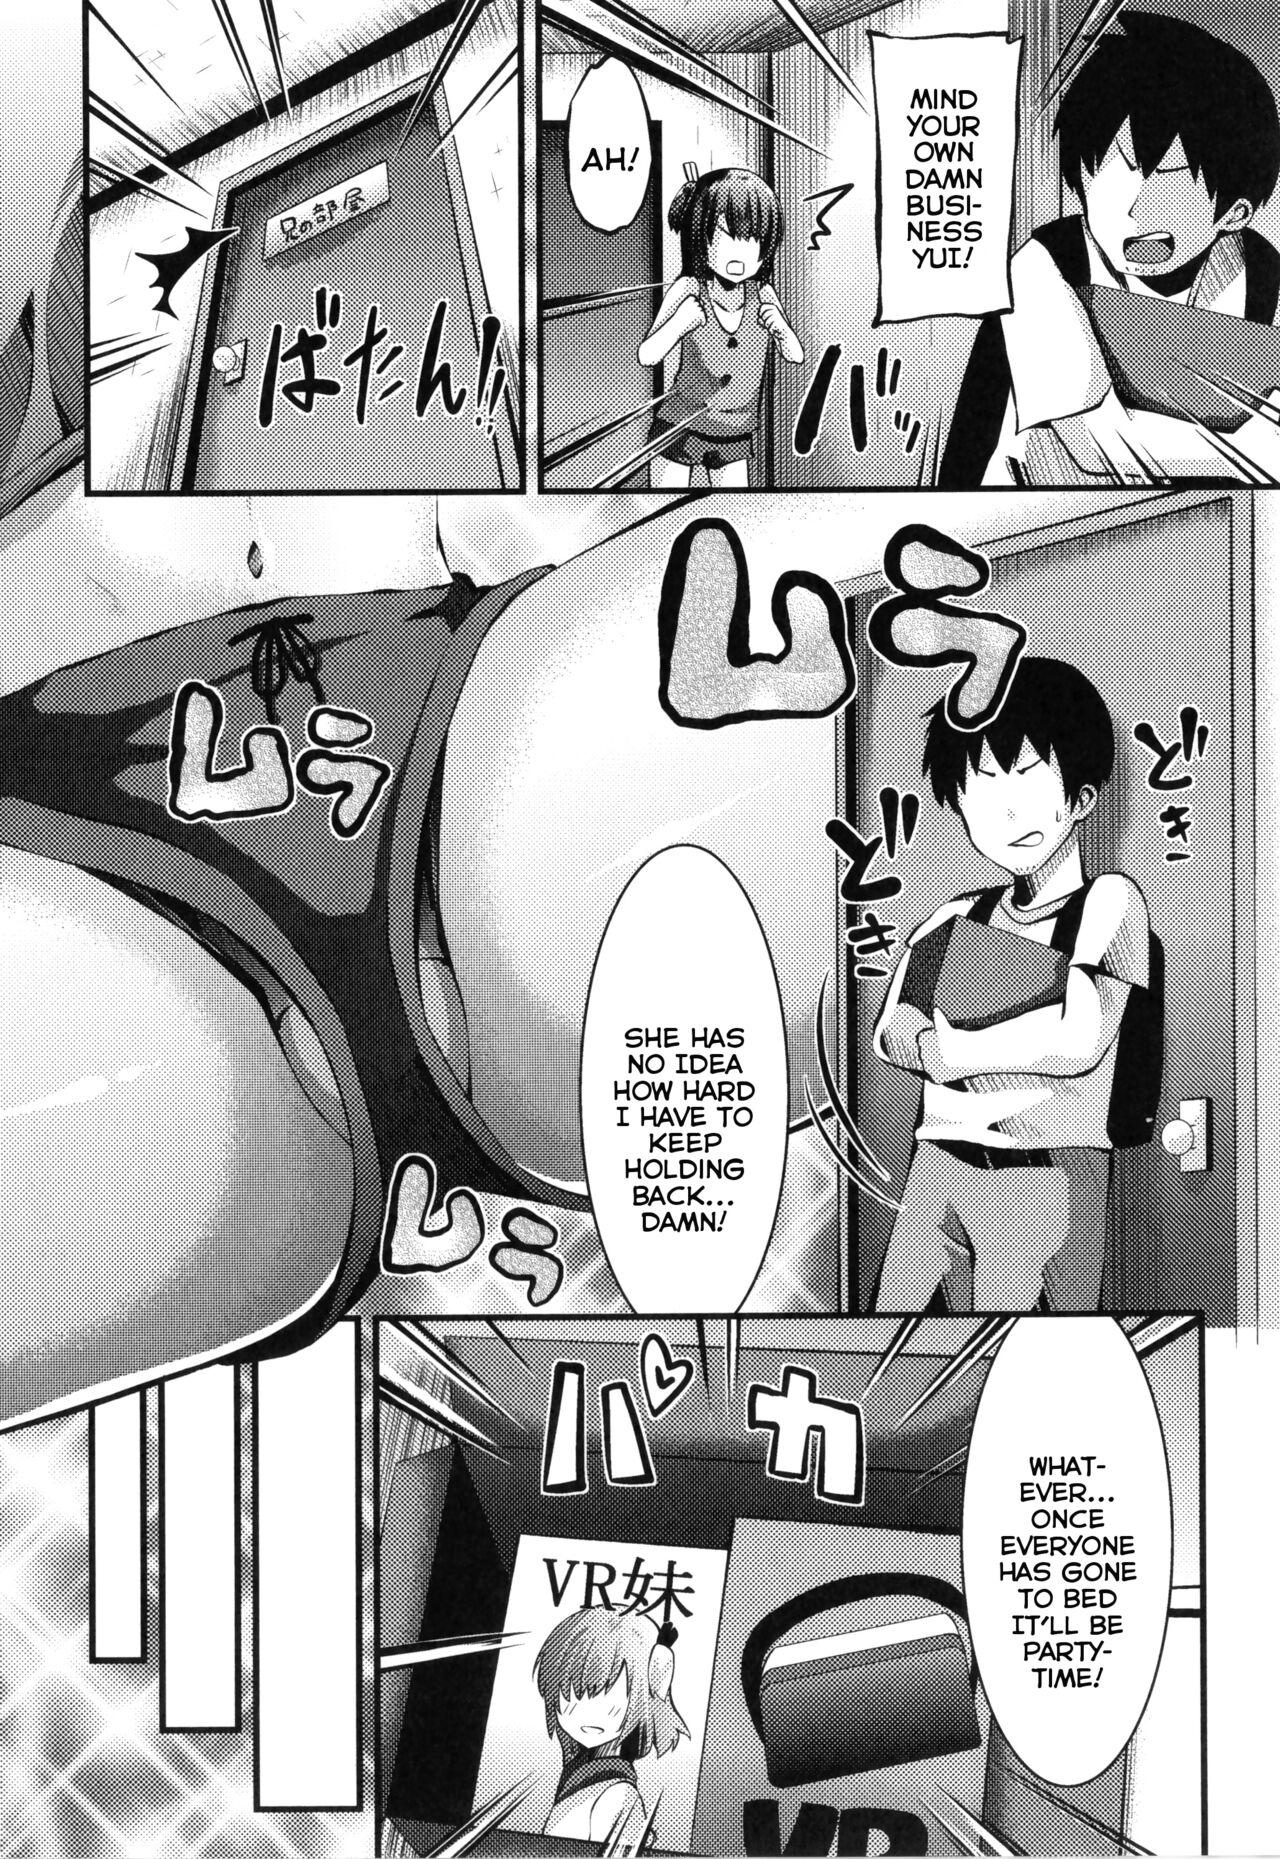 Cbt VR Imouto wa Sugu Soko ni | My VR Little-Sister is Just Around the Corner Teasing - Page 3